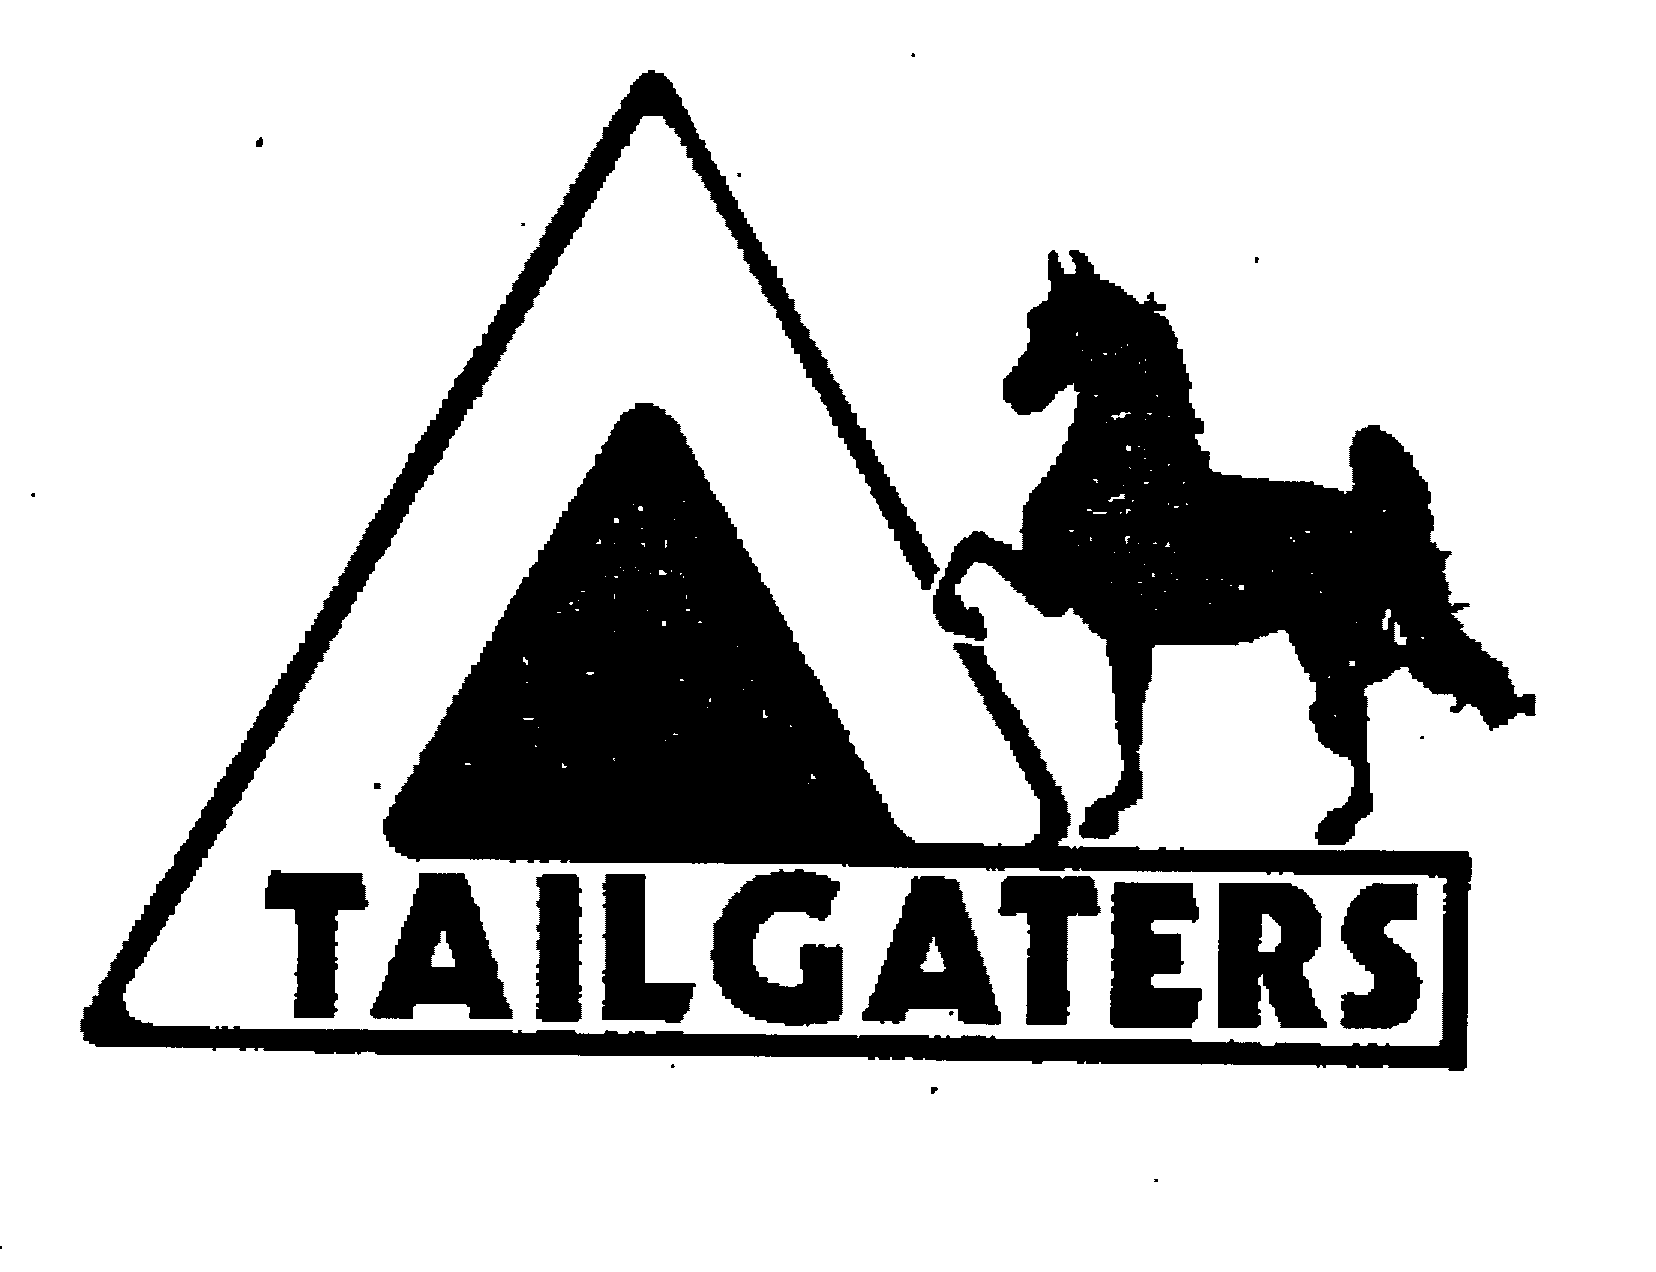 TAILGATERS